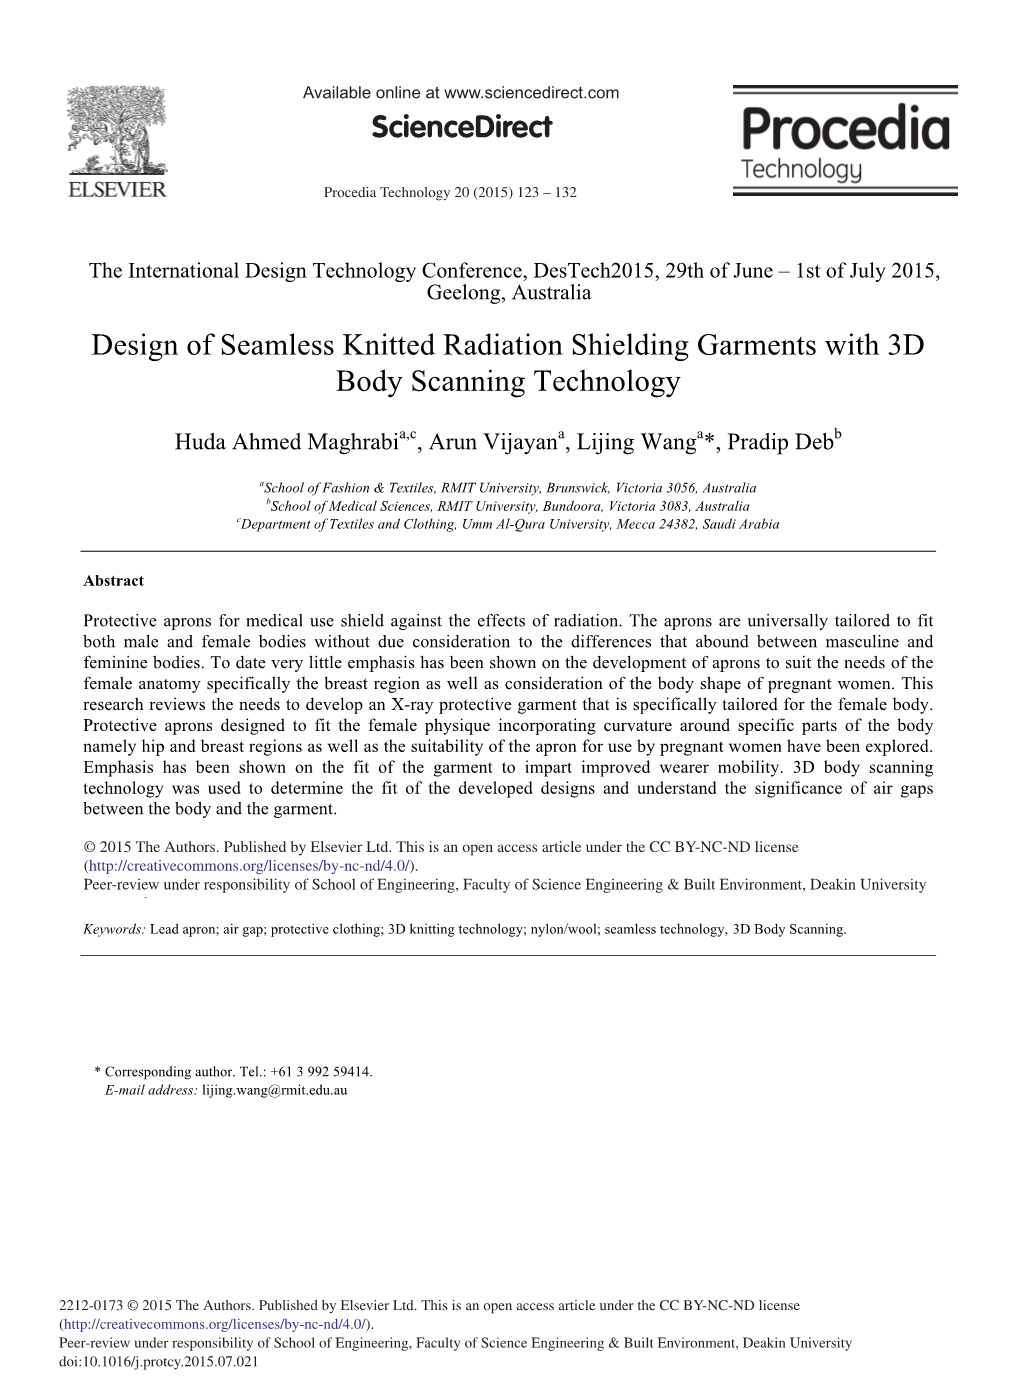 Design of Seamless Knitted Radiation Shielding Garments with 3D Body Scanning Technology